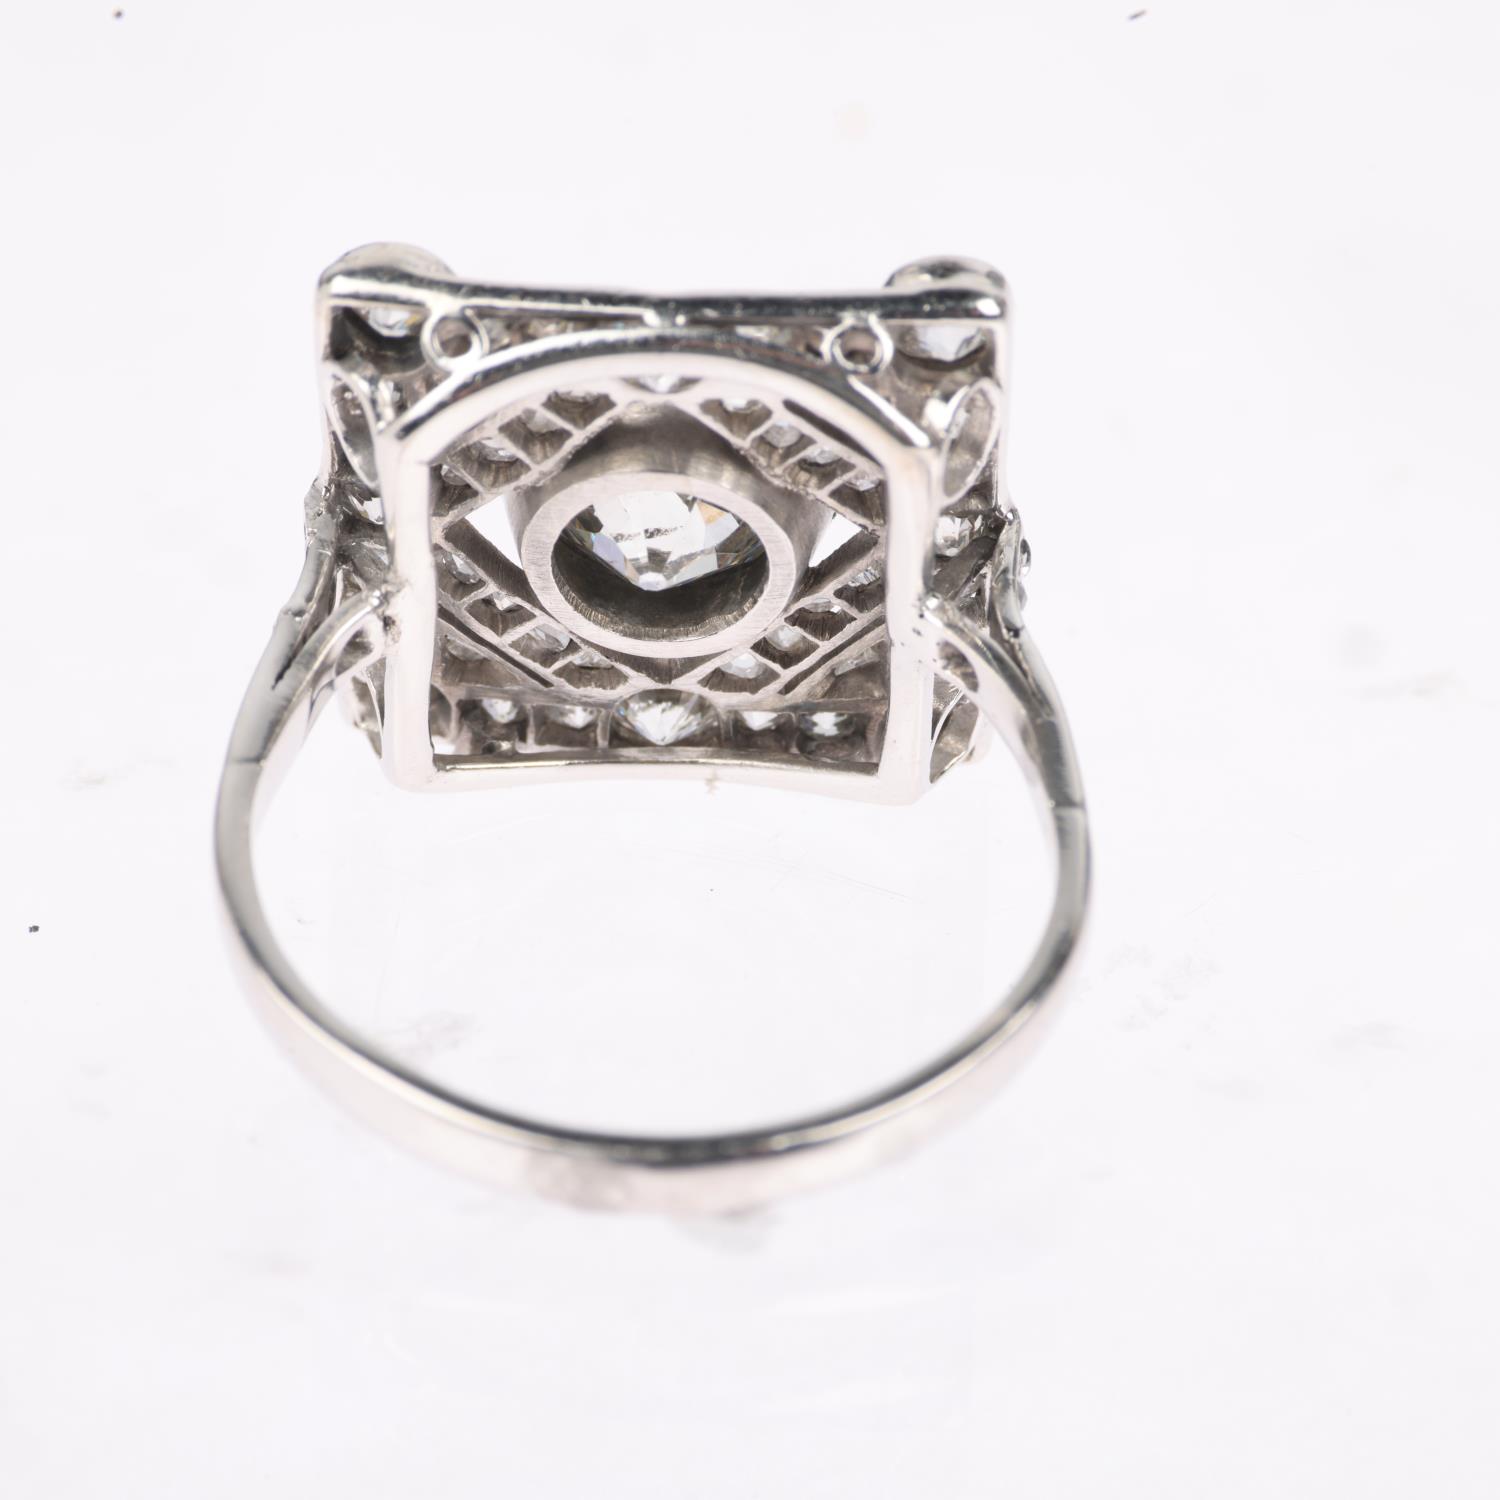 An Art Deco platinum diamond geometric panel ring, centrally set with 1.15ct old European-cut - Image 3 of 4